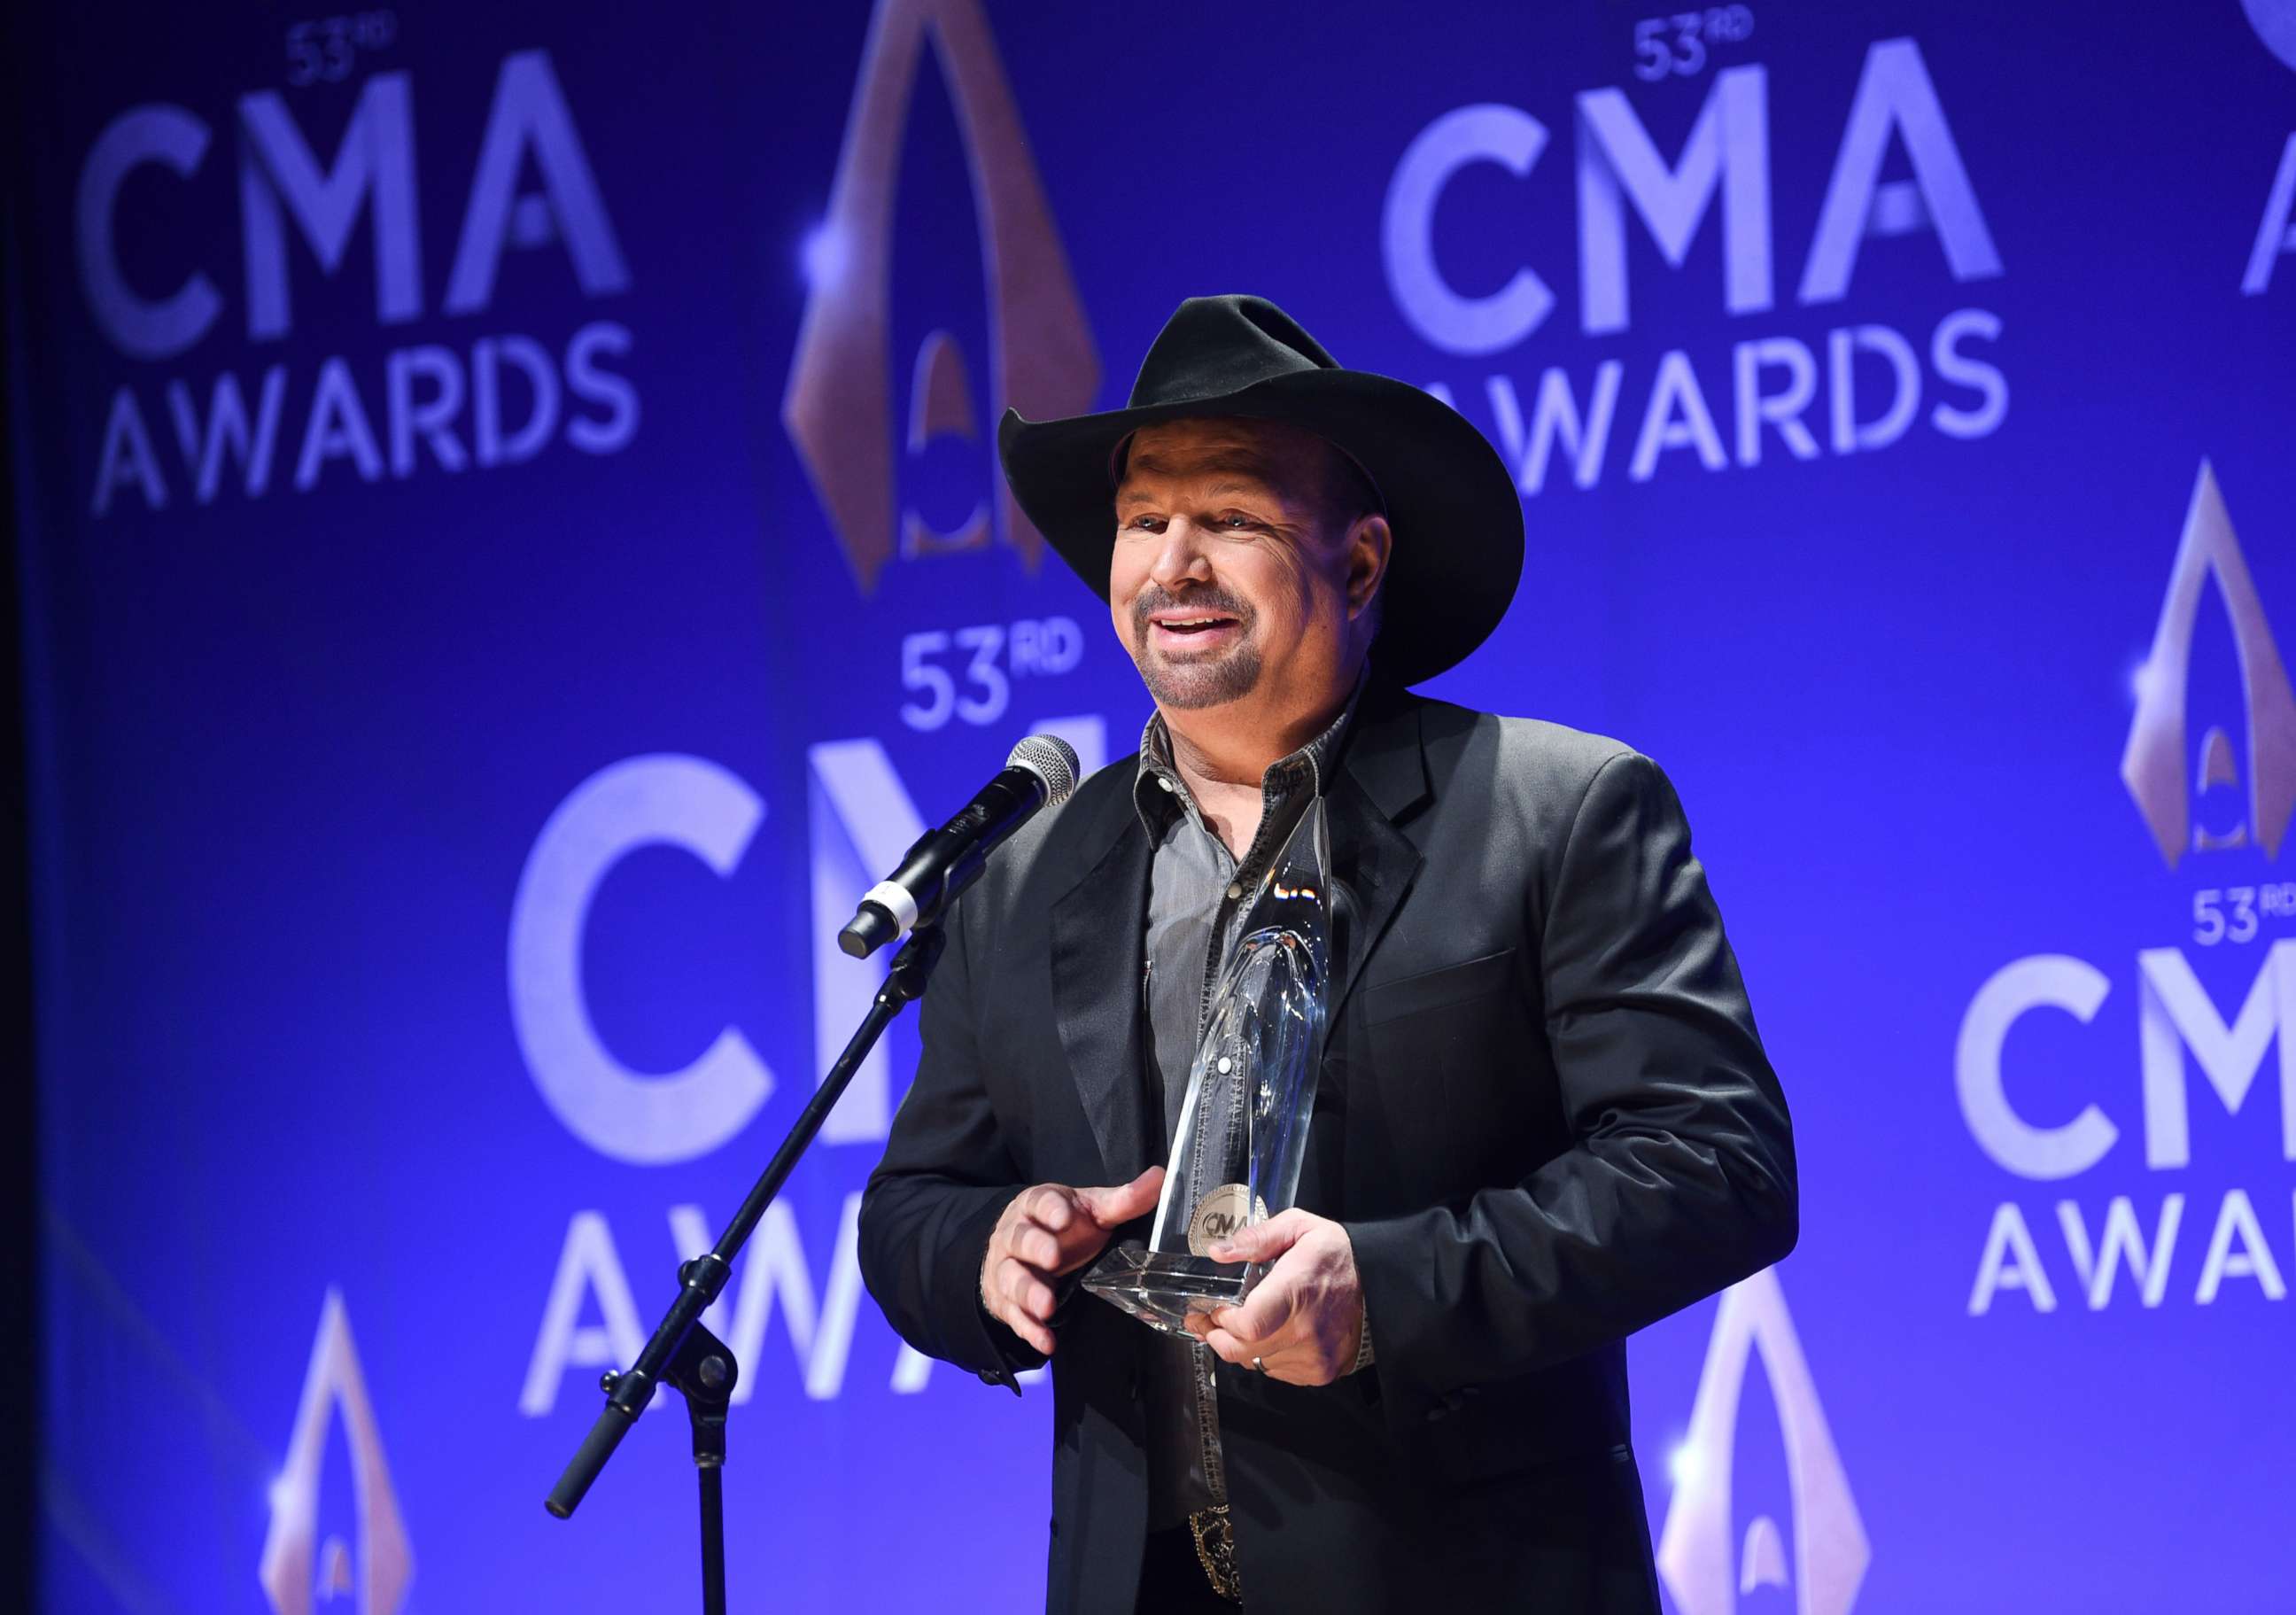 PHOTO: Garth Brooks speaks in the press room after winning the entertainer of the year award at the 53rd annual CMA Awards at Bridgestone Arena, Nov. 13, 2019, in Nashville, Tenn.